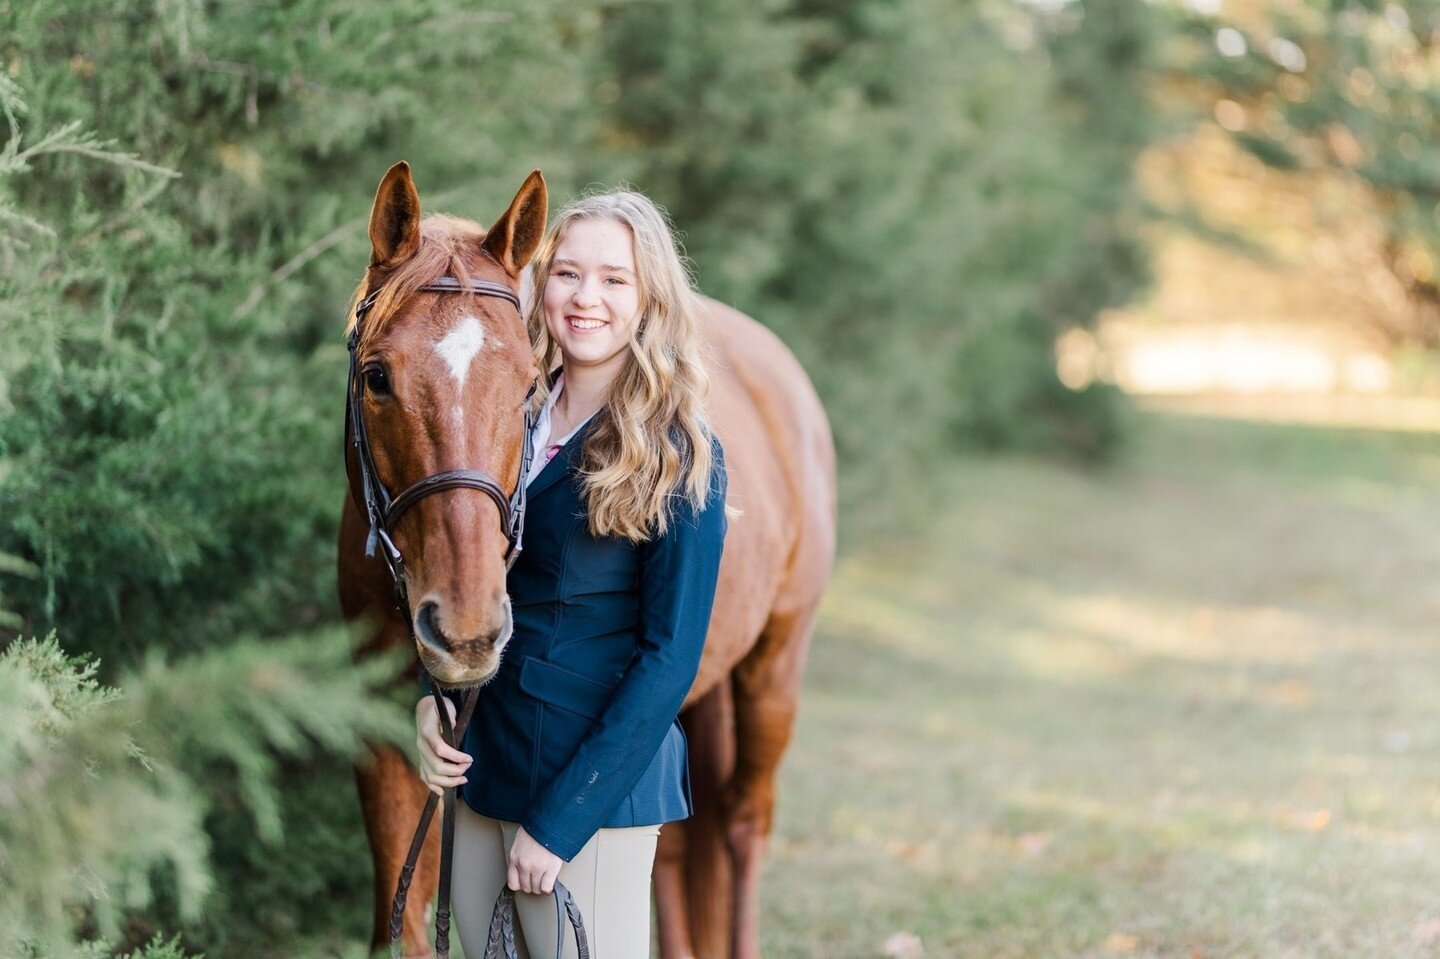 This is Allie &amp; Tucker! Allie is the captain of the Davidson College Equestrian Team! Can't wait to share more of this beautiful branding and media session! 
.
.
@hayitsalliehay
@davidsoncollegeeq
.
.
.
.
#horseandrider #horseandriderphotoshoot #